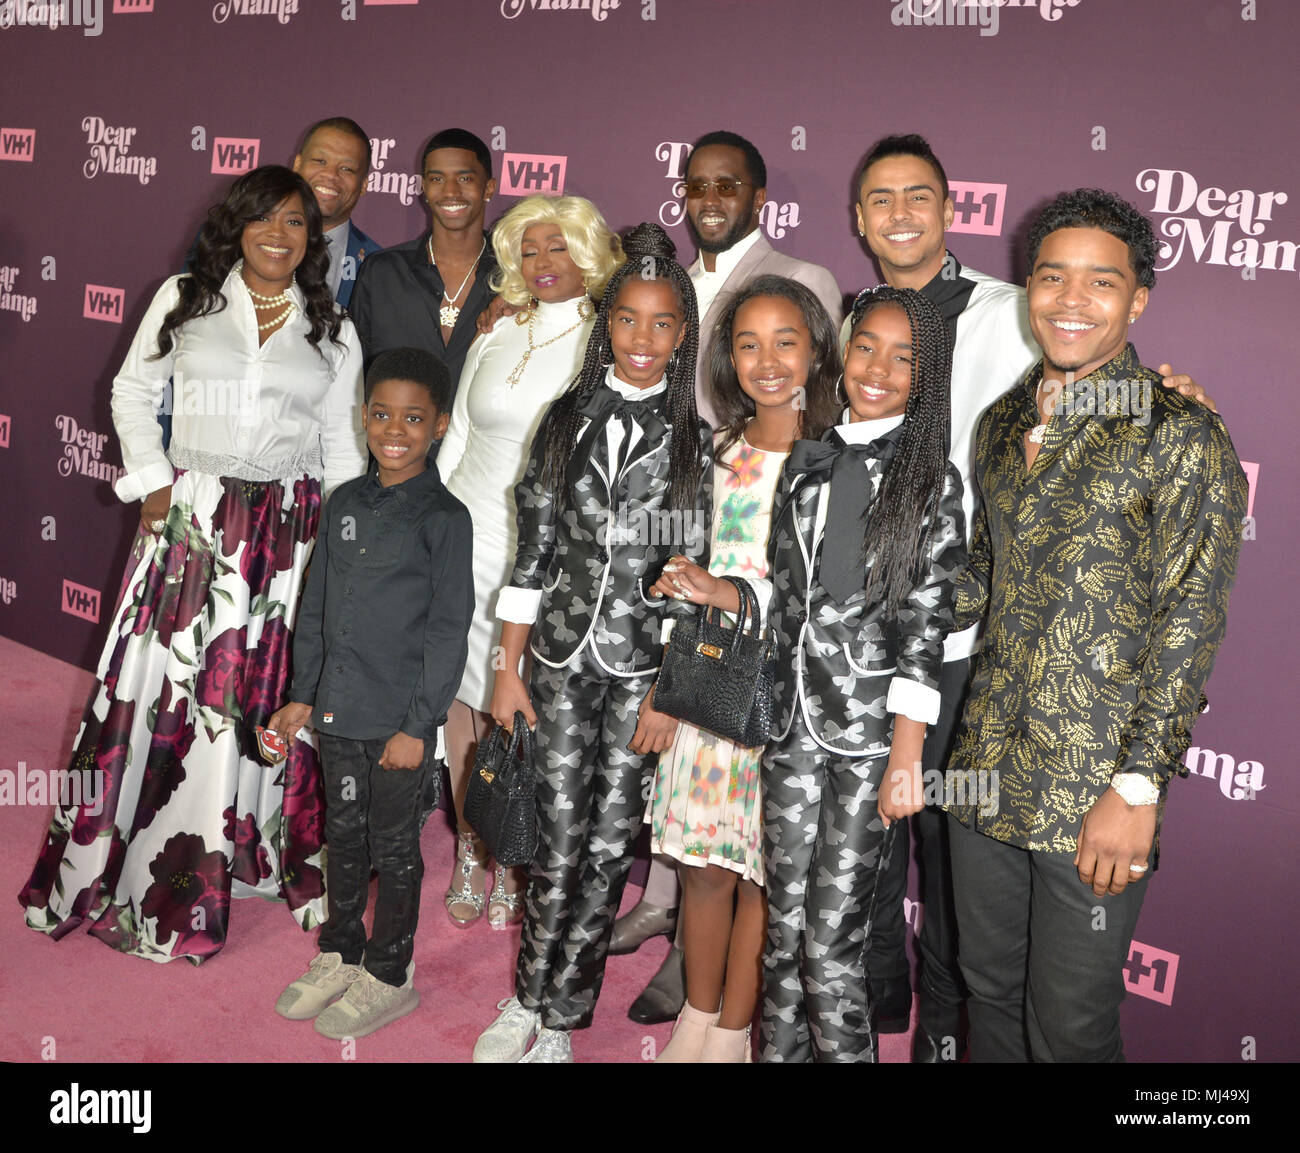 Los Angeles, Ca, USA. 03rd May, 2018. P. Diddy, Janice Combs, Christian Combs, Quincey, Brown, Justin Combs at the VH1's Third Annual 'Dear Mama: A Love Letter to Moms' at the Theatre at ACE Hotel on May 3, 2018 in Los Angeles, California. Credit: Koi Sojer/Snap'n U Photos/Media Punch/Alamy Live News Stock Photo